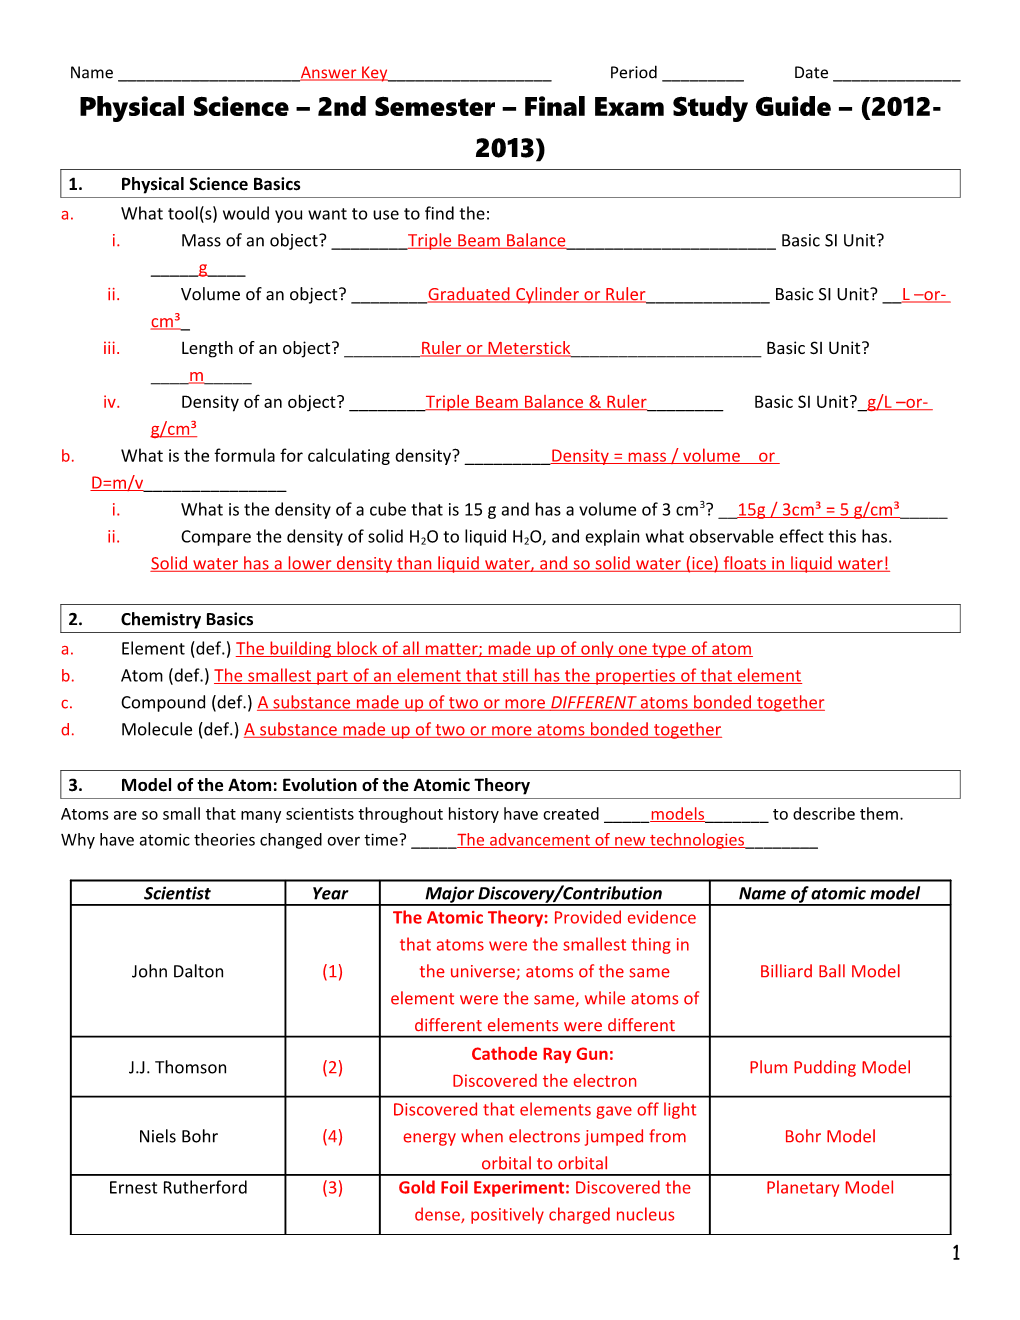 Physical Science 2Nd Semester Final Exam Study Guide (2012-2013)